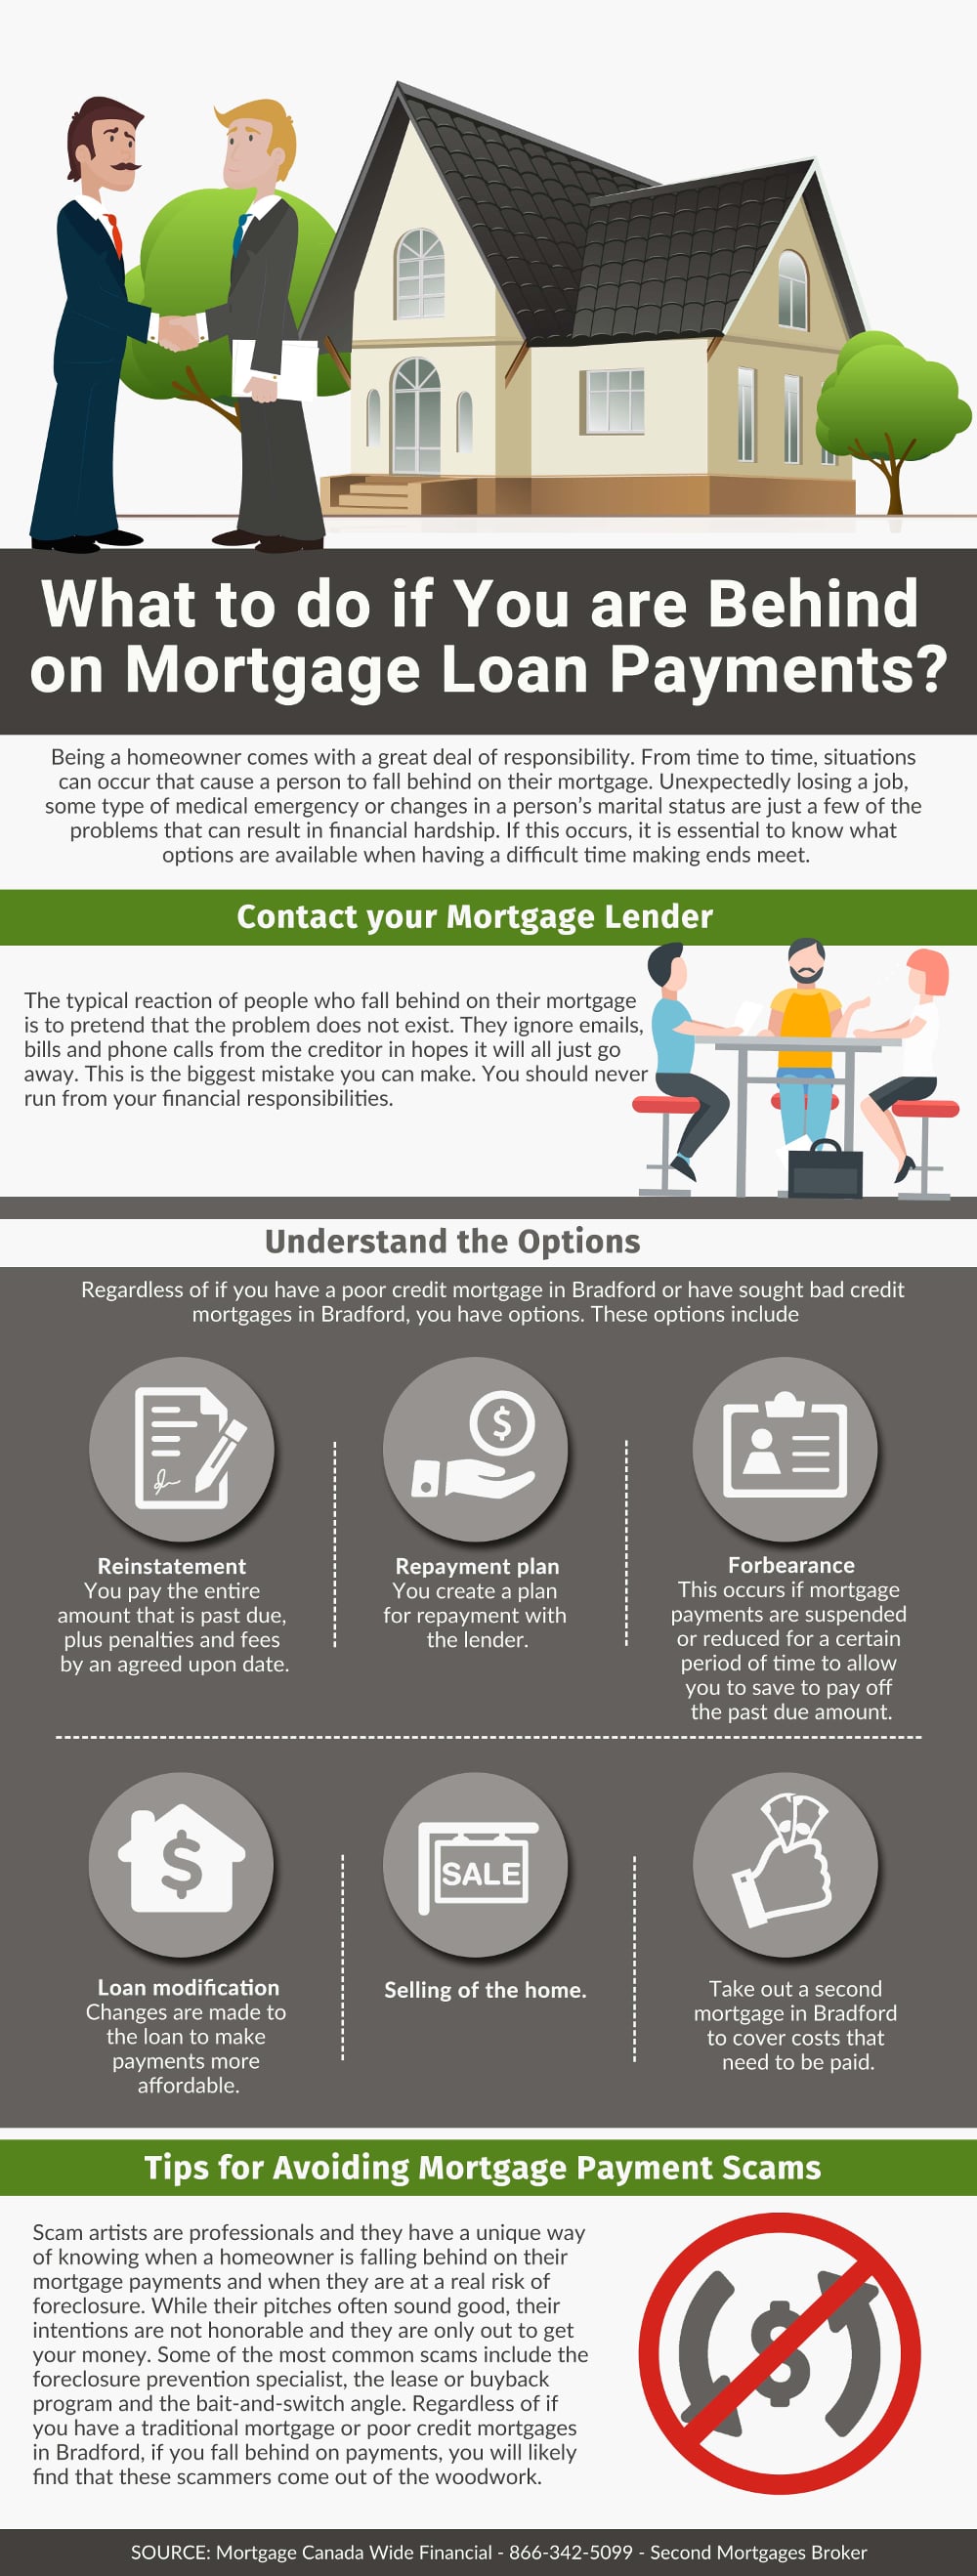 What to do if You are Behind on Mortgage Loan Payments? - Infographic